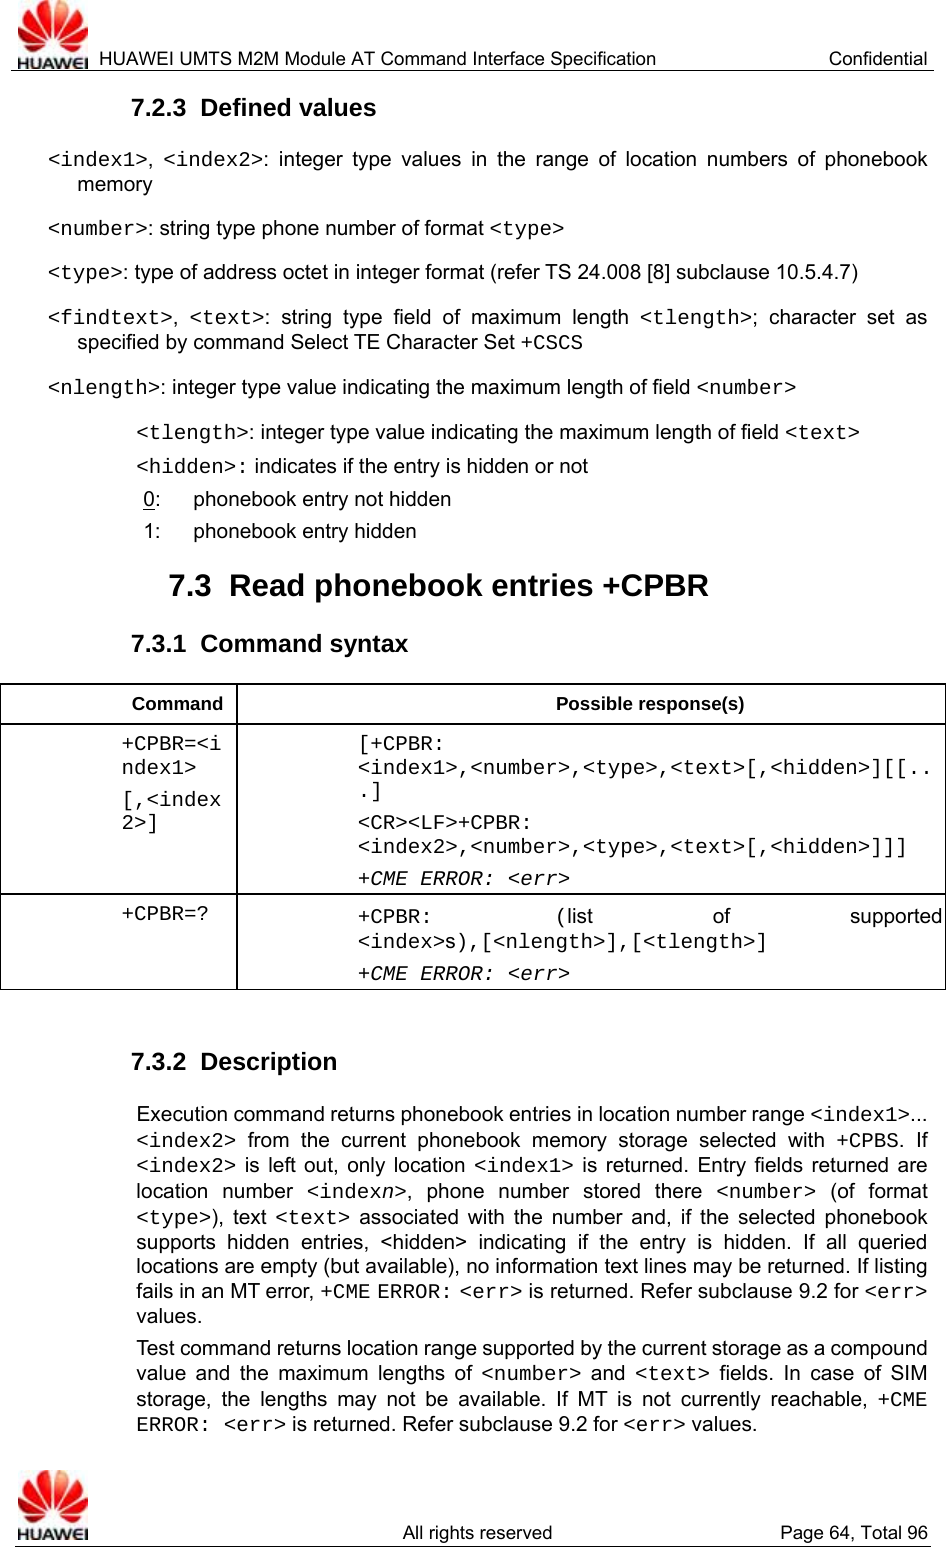  HUAWEI UMTS M2M Module AT Command Interface Specification  Confidential   All rights reserved  Page 64, Total 96 7.2.3  Defined values &lt;index1&gt;,  &lt;index2&gt;: integer type values in the range of location numbers of phonebook memory &lt;number&gt;: string type phone number of format &lt;type&gt; &lt;type&gt;: type of address octet in integer format (refer TS 24.008 [8] subclause 10.5.4.7) &lt;findtext&gt;,  &lt;text&gt;: string type field of maximum length &lt;tlength&gt;; character set as specified by command Select TE Character Set +CSCS &lt;nlength&gt;: integer type value indicating the maximum length of field &lt;number&gt; &lt;tlength&gt;: integer type value indicating the maximum length of field &lt;text&gt; &lt;hidden&gt;: indicates if the entry is hidden or not 0:    phonebook entry not hidden 1:  phonebook entry hidden 7.3  Read phonebook entries +CPBR 7.3.1  Command syntax Command Possible response(s) +CPBR=&lt;index1&gt; [,&lt;index2&gt;] [+CPBR: &lt;index1&gt;,&lt;number&gt;,&lt;type&gt;,&lt;text&gt;[,&lt;hidden&gt;][[...] &lt;CR&gt;&lt;LF&gt;+CPBR: &lt;index2&gt;,&lt;number&gt;,&lt;type&gt;,&lt;text&gt;[,&lt;hidden&gt;]]] +CME ERROR: &lt;err&gt; +CPBR=? +CPBR: (list of supported &lt;index&gt;s),[&lt;nlength&gt;],[&lt;tlength&gt;] +CME ERROR: &lt;err&gt;  7.3.2  Description Execution command returns phonebook entries in location number range &lt;index1&gt;... &lt;index2&gt; from the current phonebook memory storage selected with +CPBS. If &lt;index2&gt; is left out, only location &lt;index1&gt; is returned. Entry fields returned are location number &lt;indexn&gt;, phone number stored there &lt;number&gt; (of format &lt;type&gt;), text &lt;text&gt; associated with the number and, if the selected phonebook supports hidden entries, &lt;hidden&gt; indicating if the entry is hidden. If all queried locations are empty (but available), no information text lines may be returned. If listing fails in an MT error, +CME ERROR: &lt;err&gt; is returned. Refer subclause 9.2 for &lt;err&gt; values. Test command returns location range supported by the current storage as a compound value and the maximum lengths of &lt;number&gt; and &lt;text&gt; fields. In case of SIM storage, the lengths may not be available. If MT is not currently reachable, +CME ERROR: &lt;err&gt; is returned. Refer subclause 9.2 for &lt;err&gt; values. 